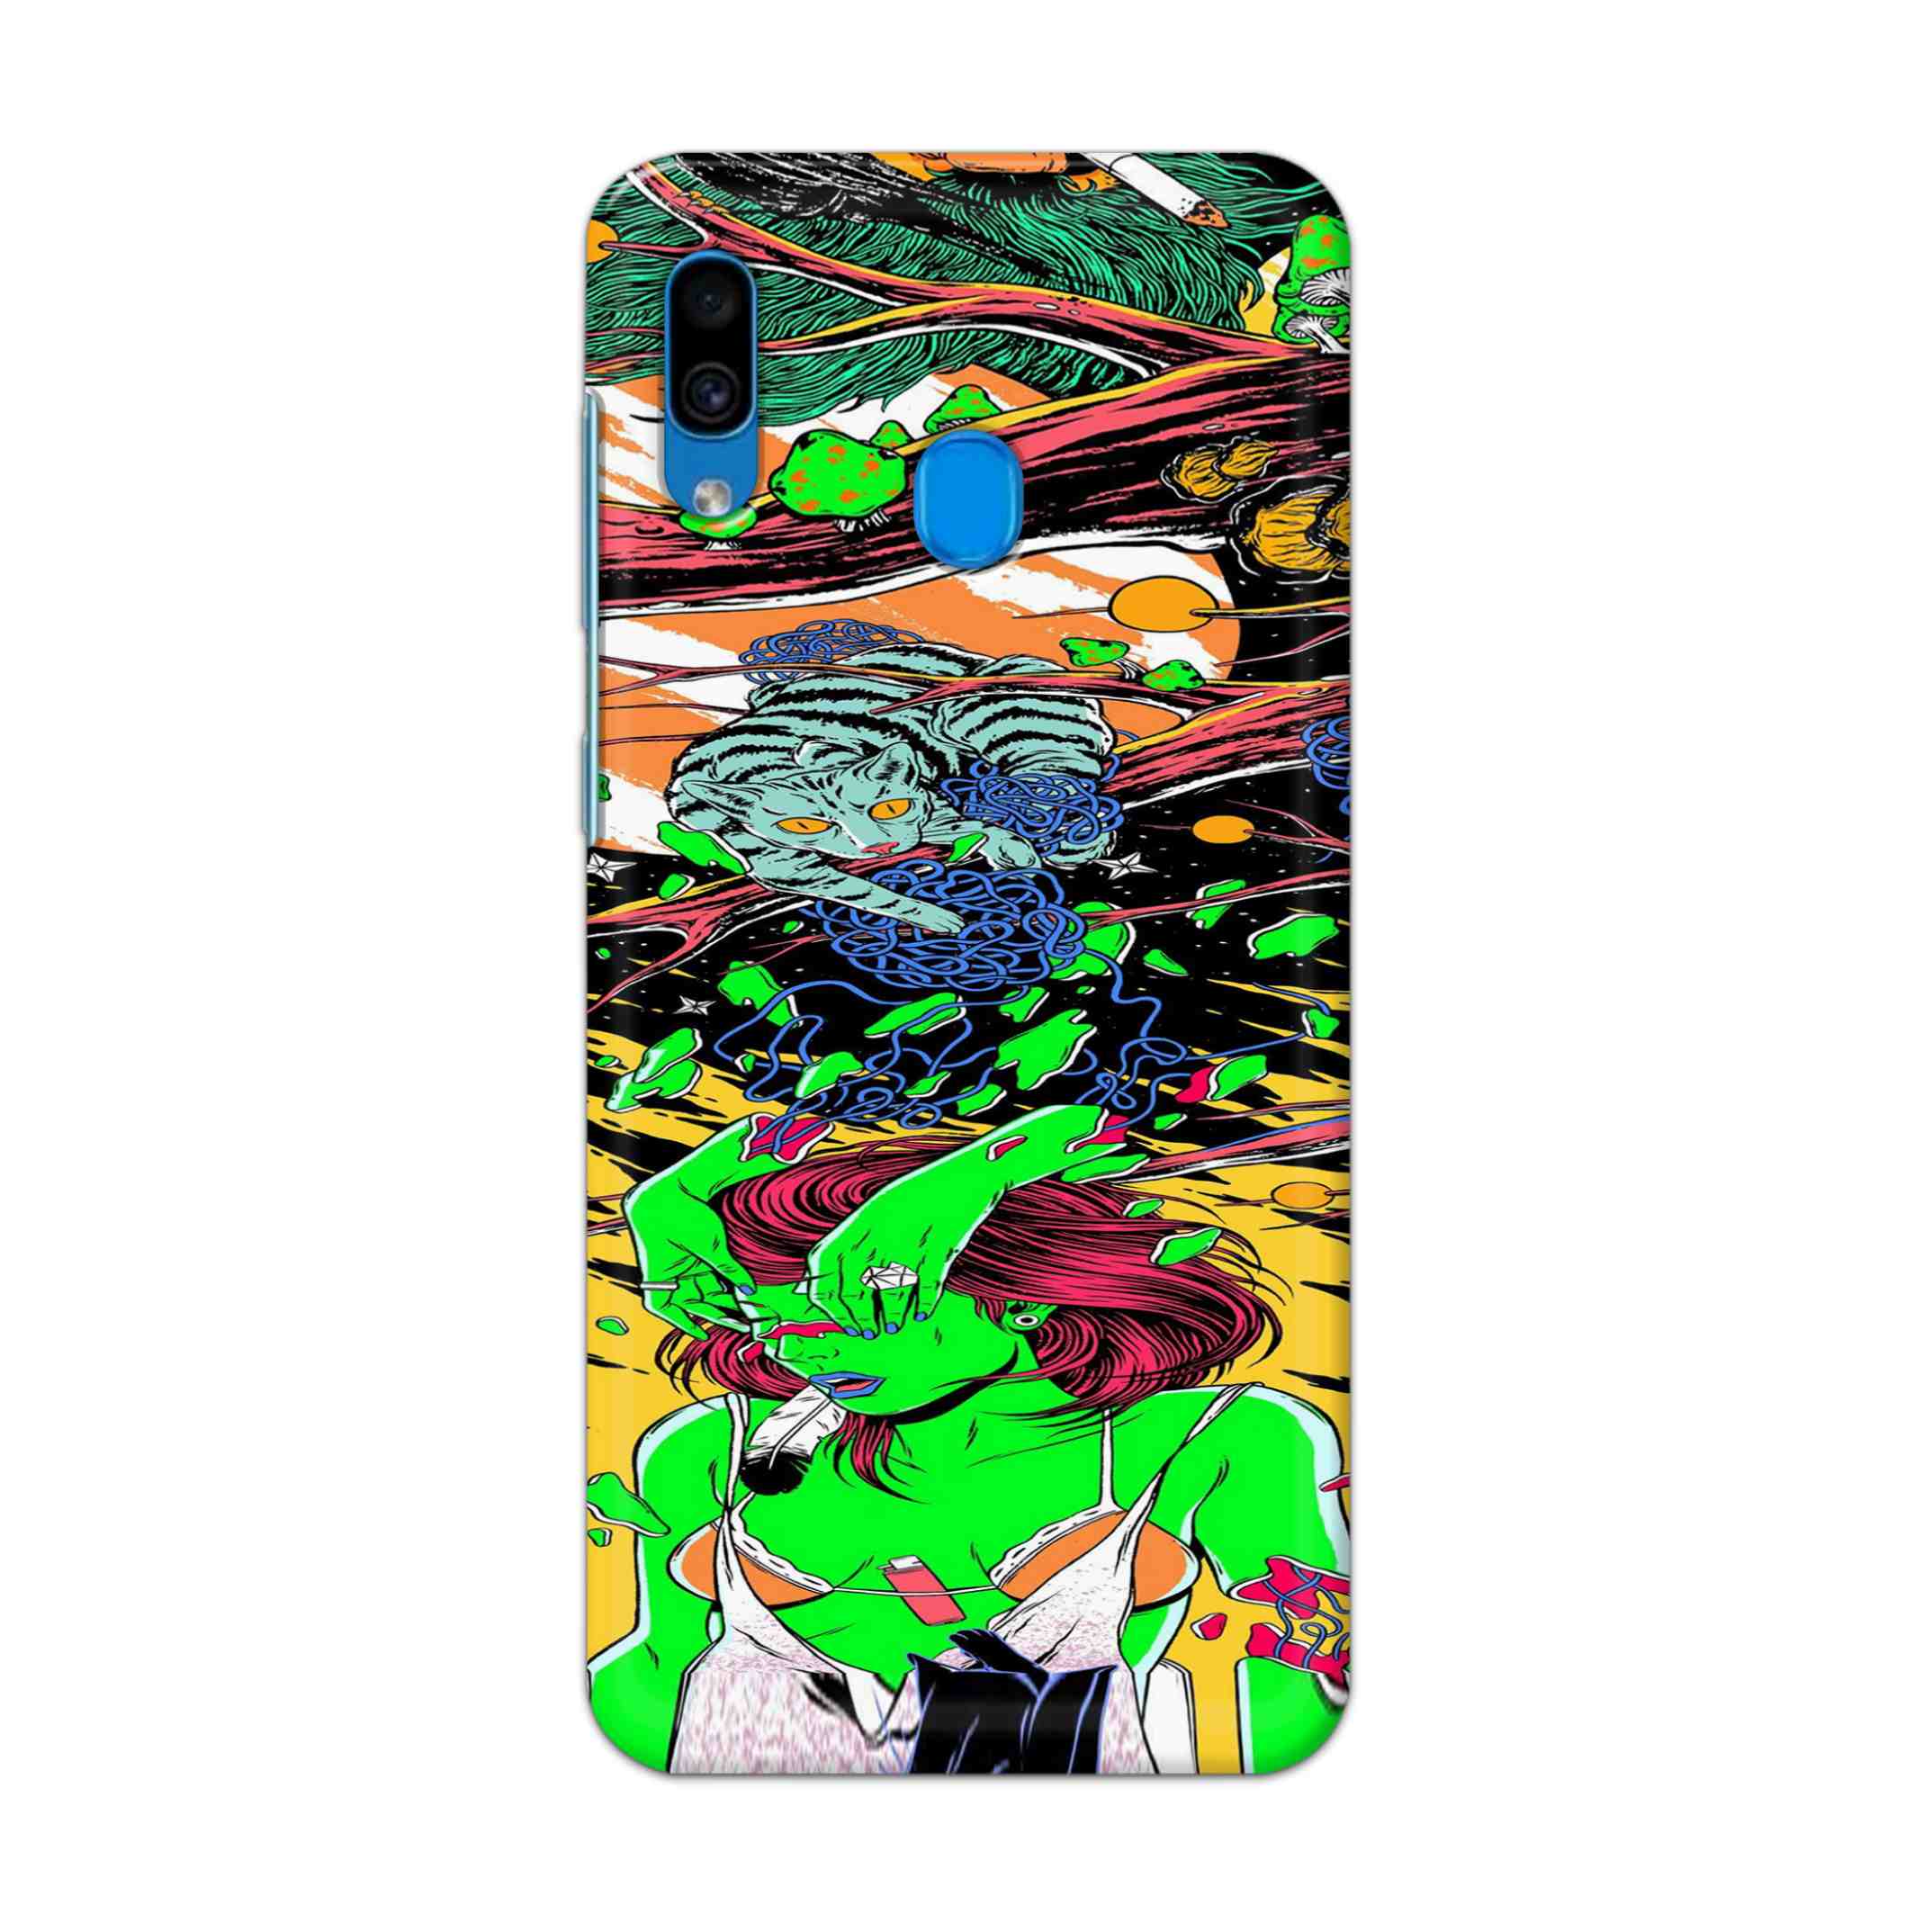 Buy Green Girl Art Hard Back Mobile Phone Case Cover For Samsung Galaxy A30 Online